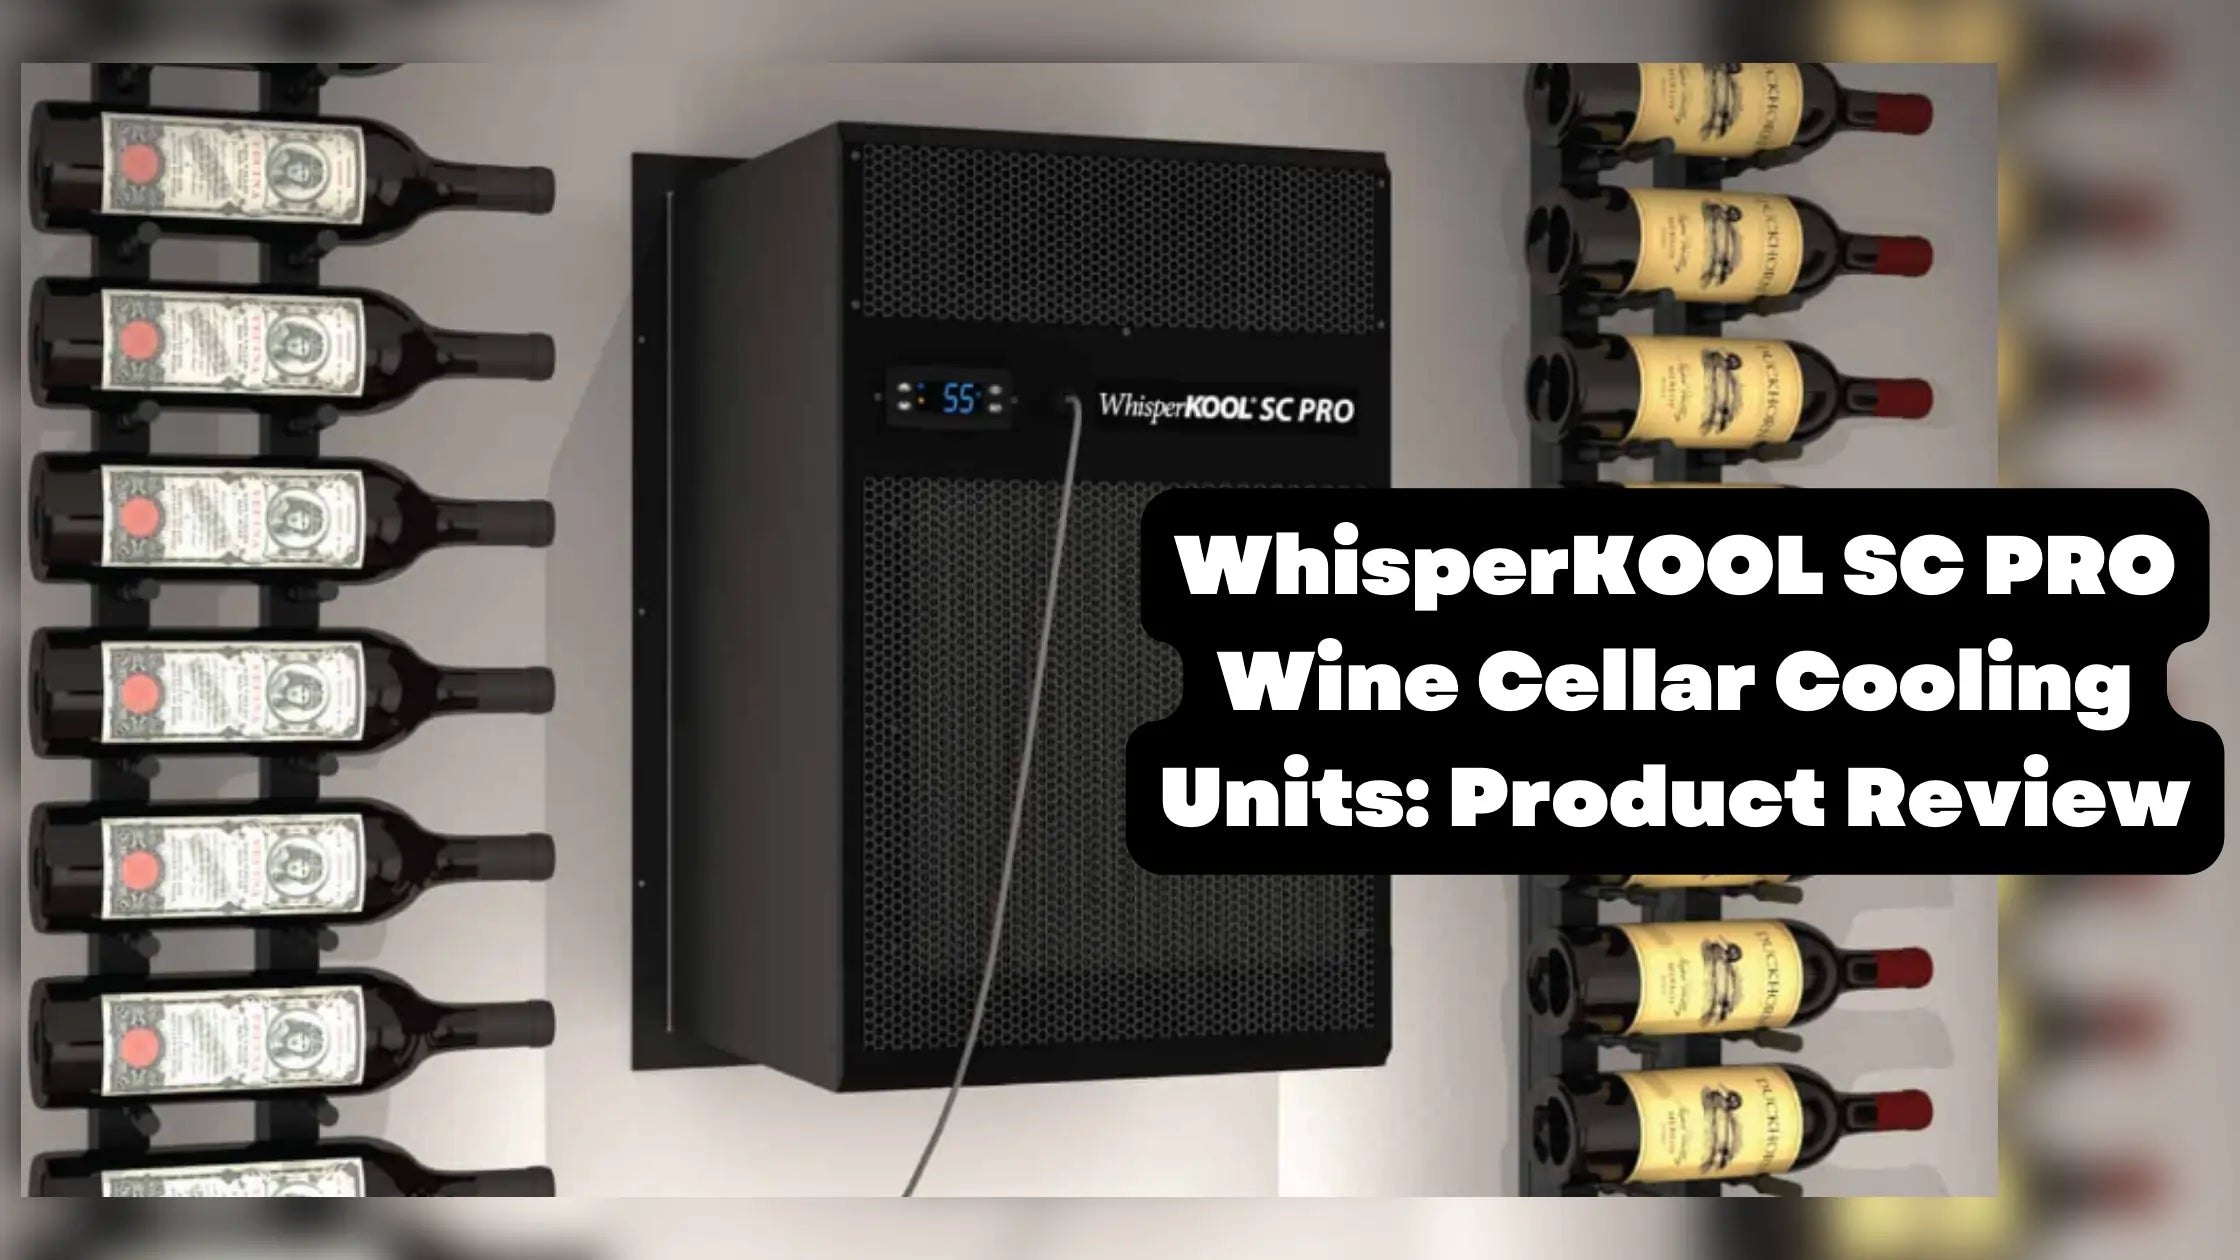 WhisperKOOL SC PRO Wine Cellar Cooling Units: Product Review